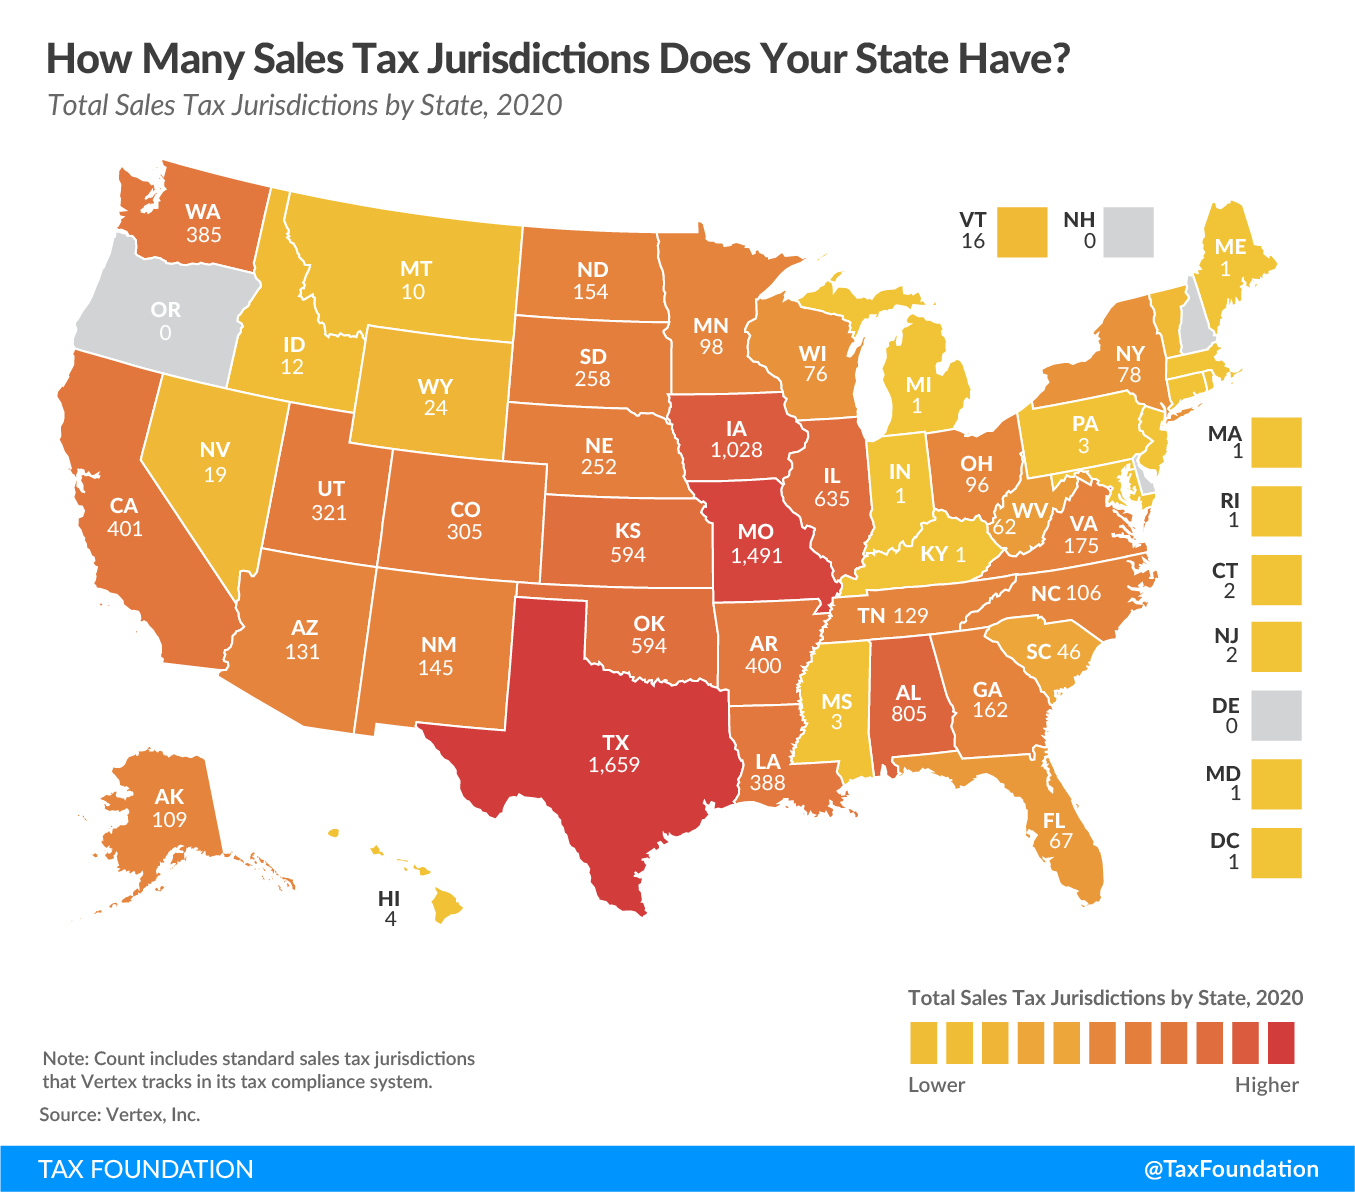 state sales tax jurisdictions by state, sales tax jurisdictions in the us